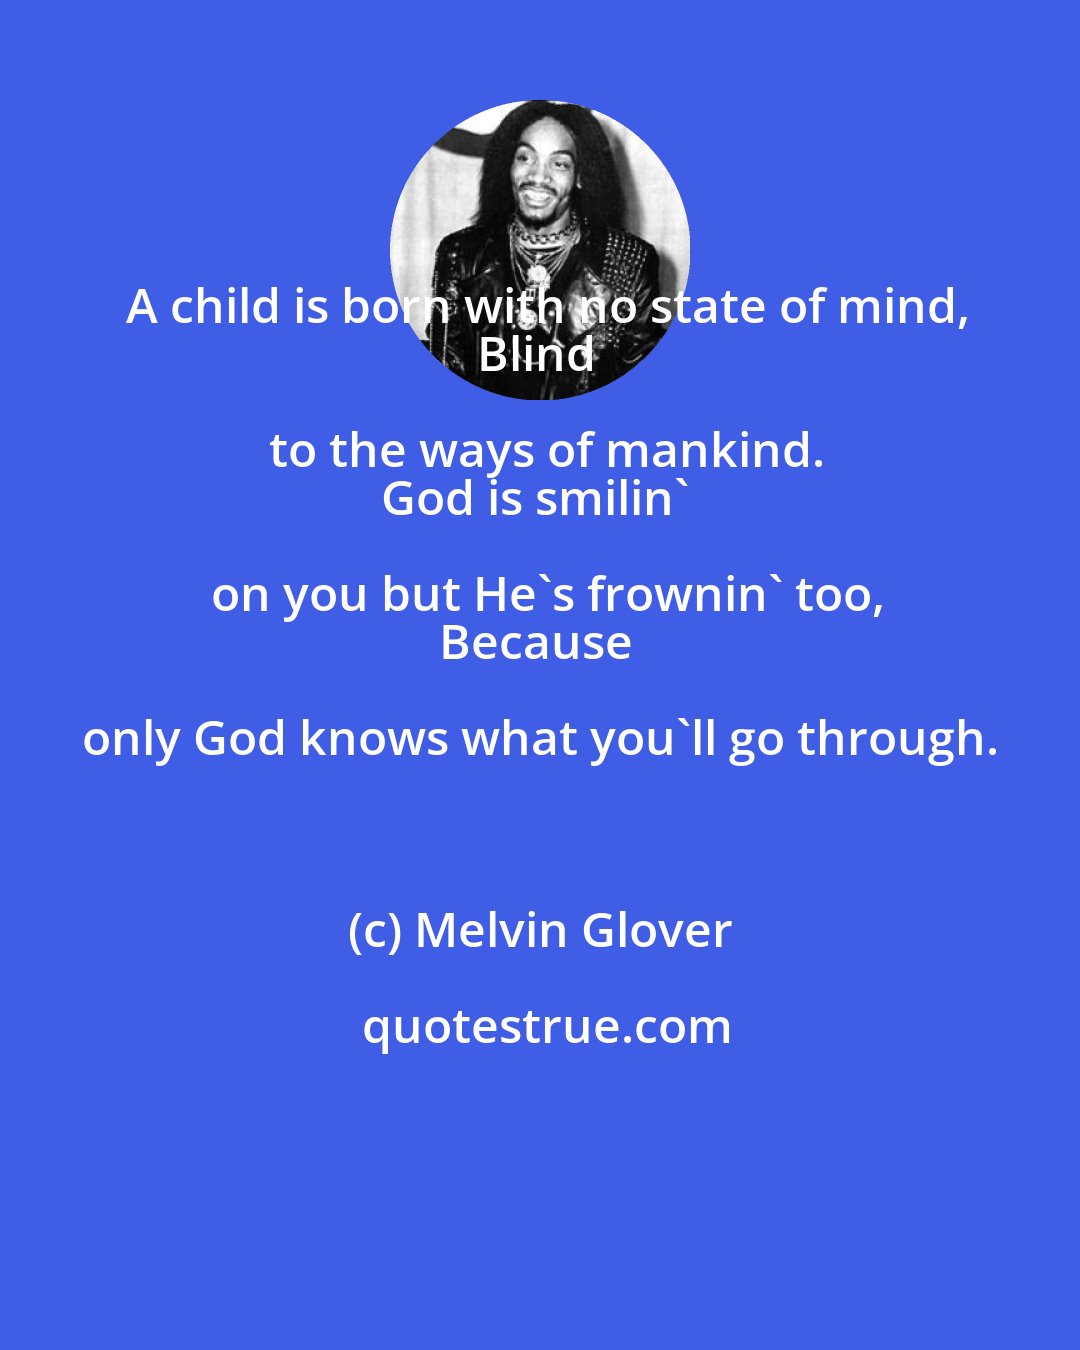 Melvin Glover: A child is born with no state of mind,
Blind to the ways of mankind.
God is smilin' on you but He's frownin' too,
Because only God knows what you'll go through.